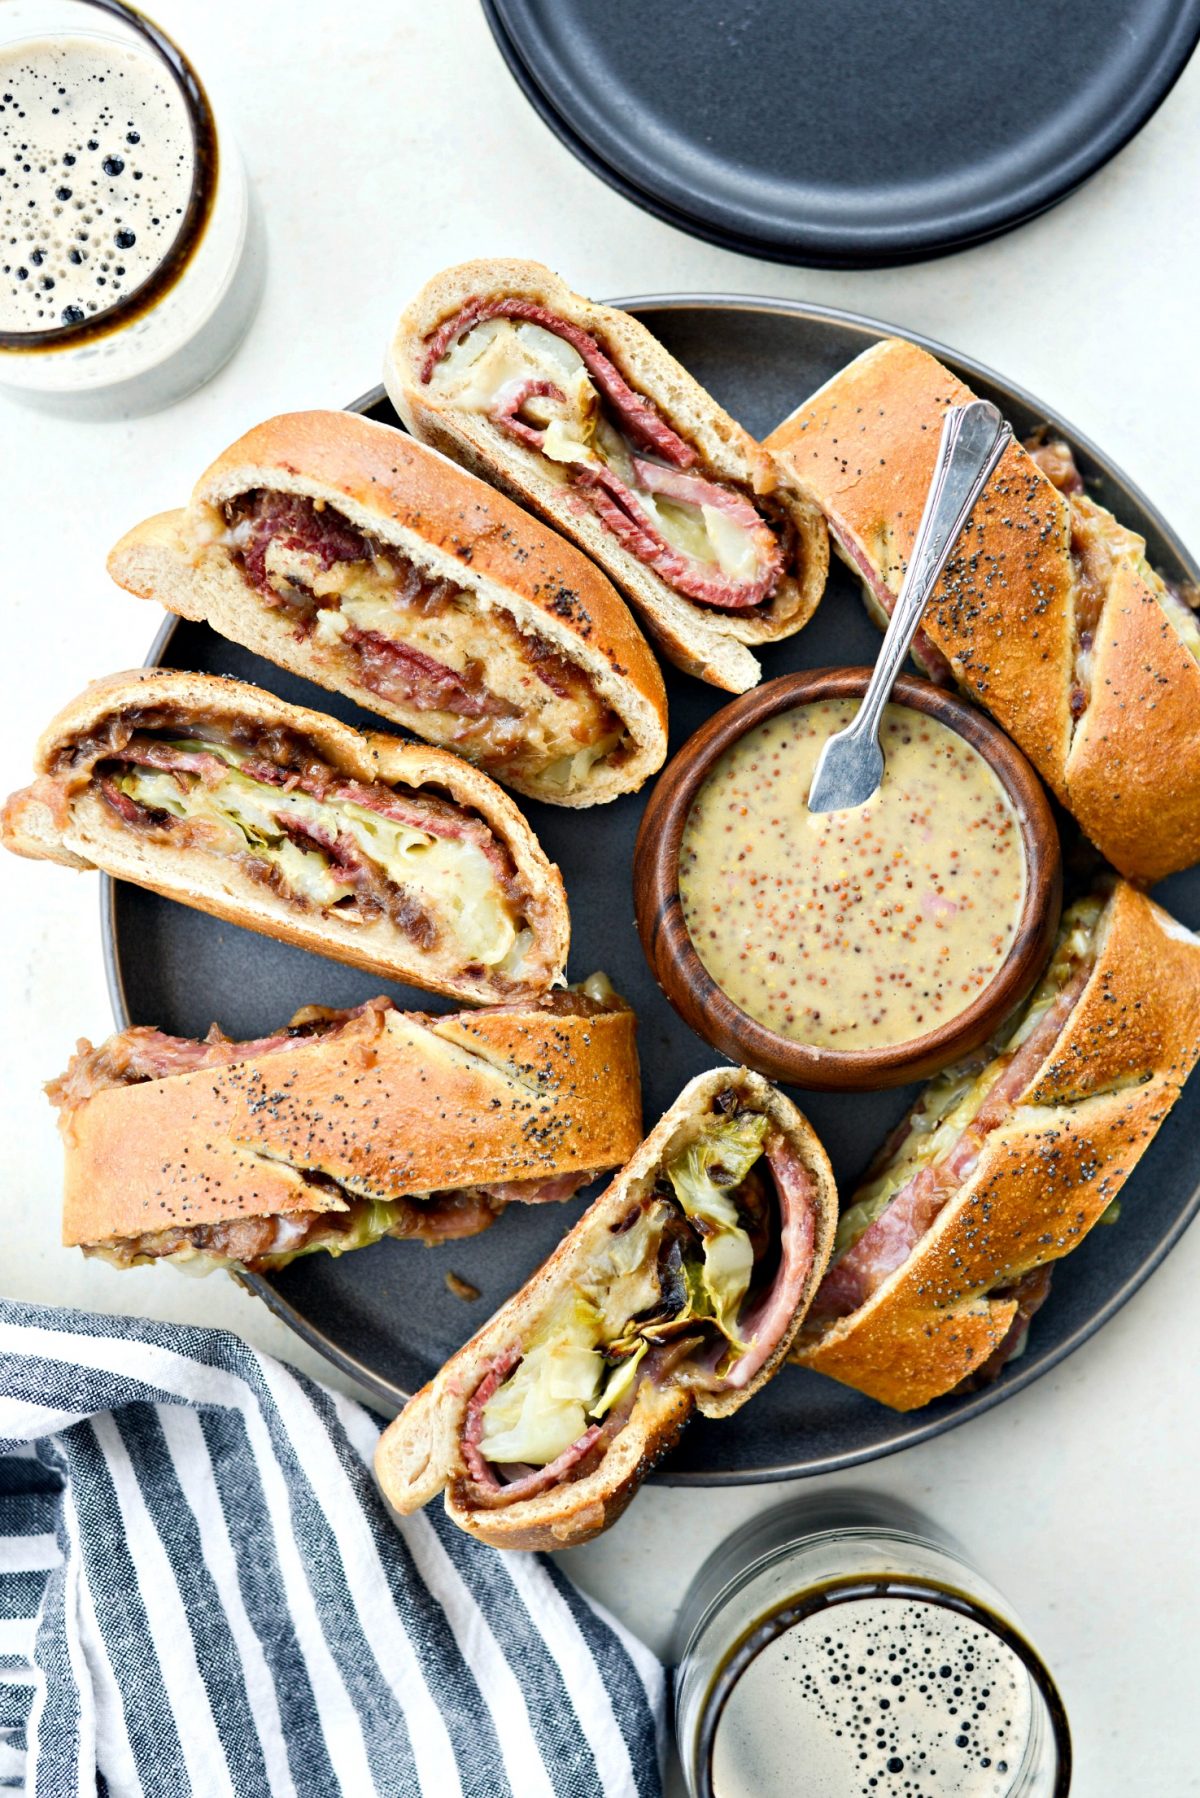 Corned Beef and Cabbage Stromboli with Guinness Mustard on platter